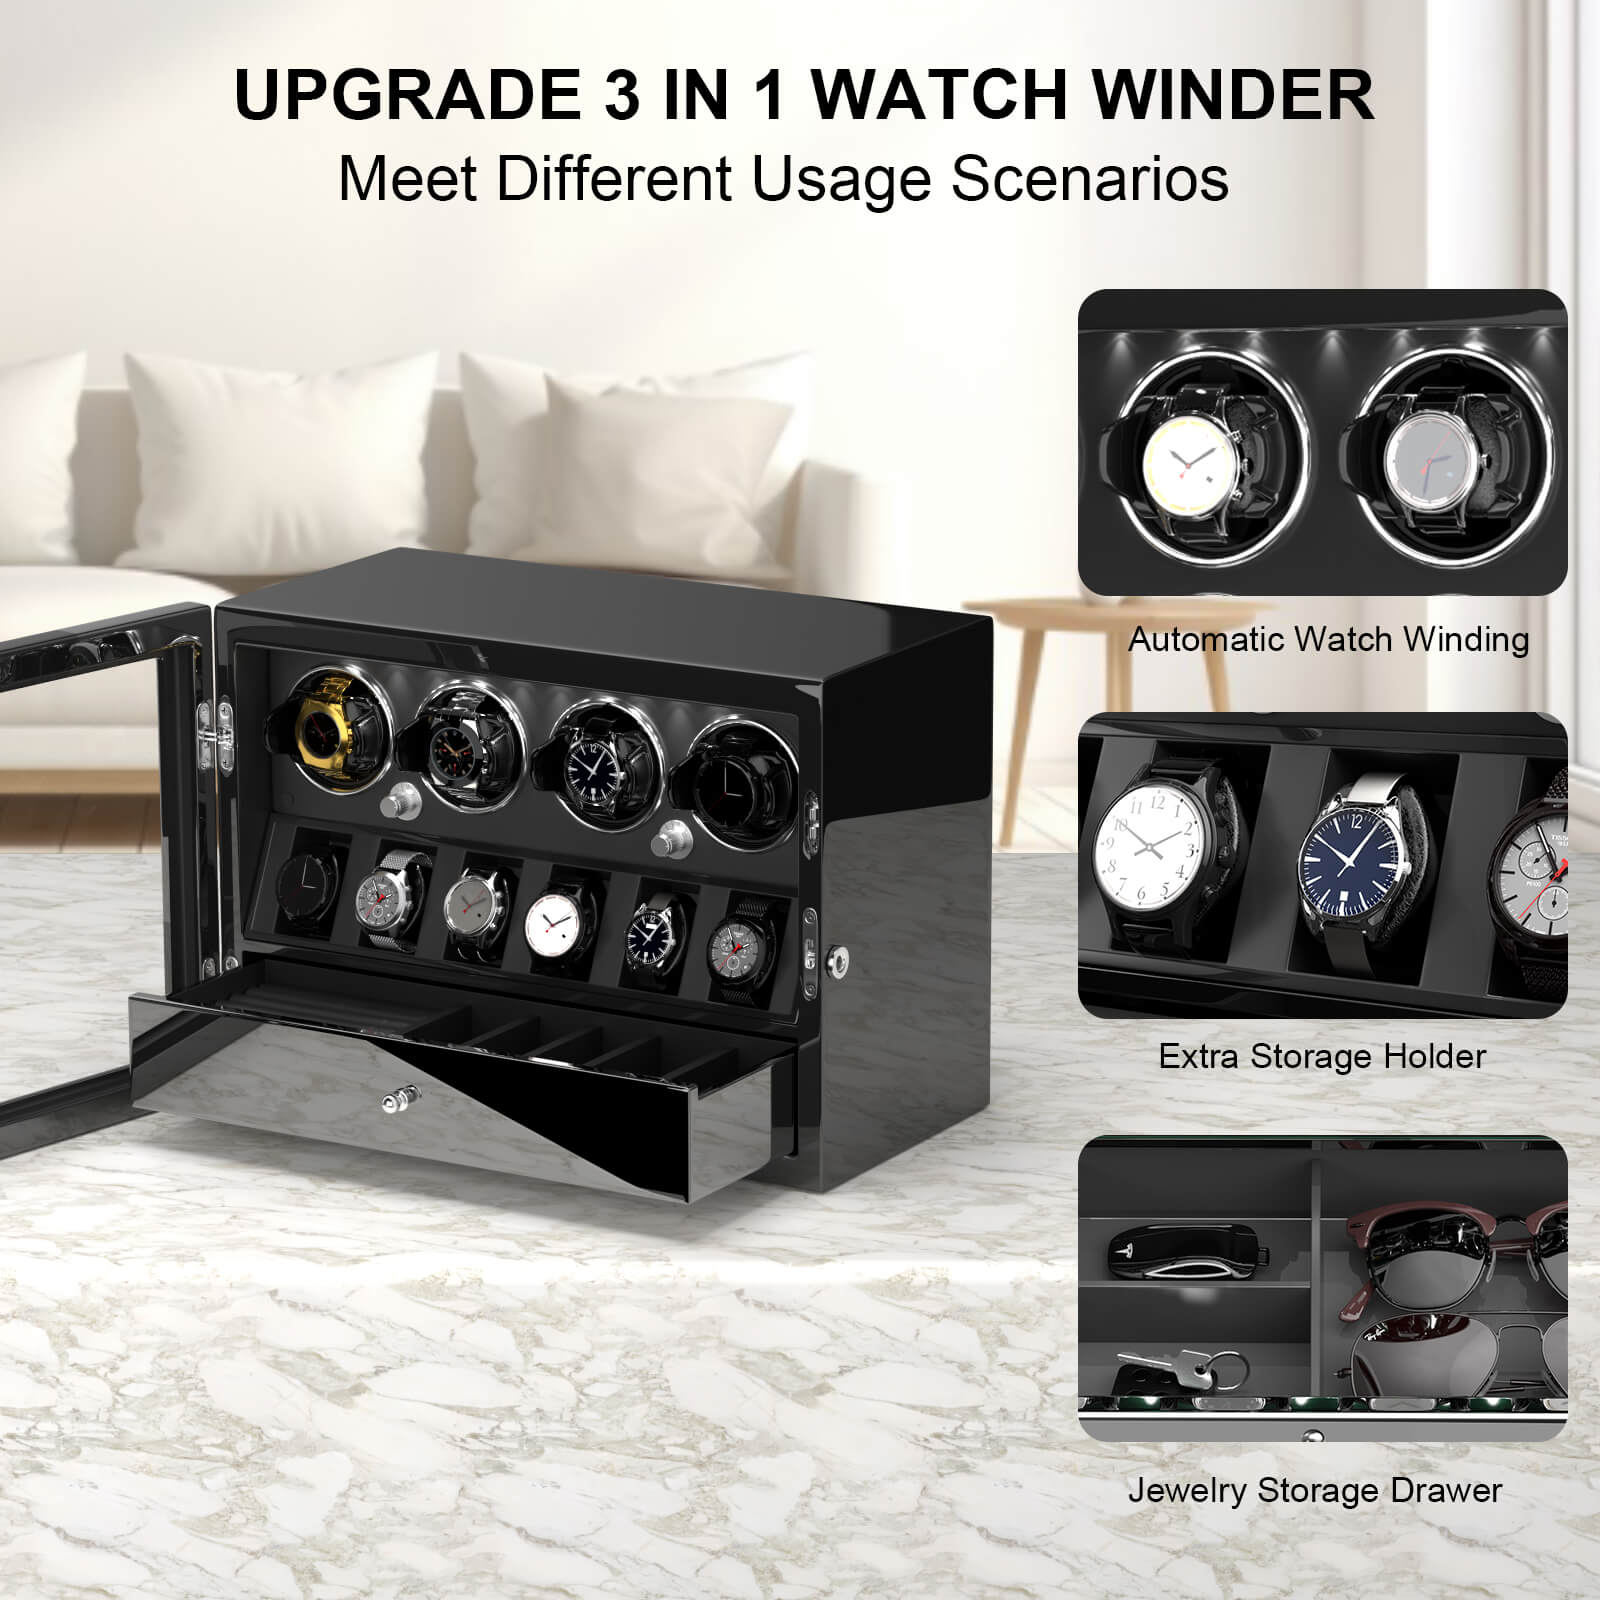 Compact 4 Watch Winders for Automatic Watches with 6 Watches Organizer Display Case - Black